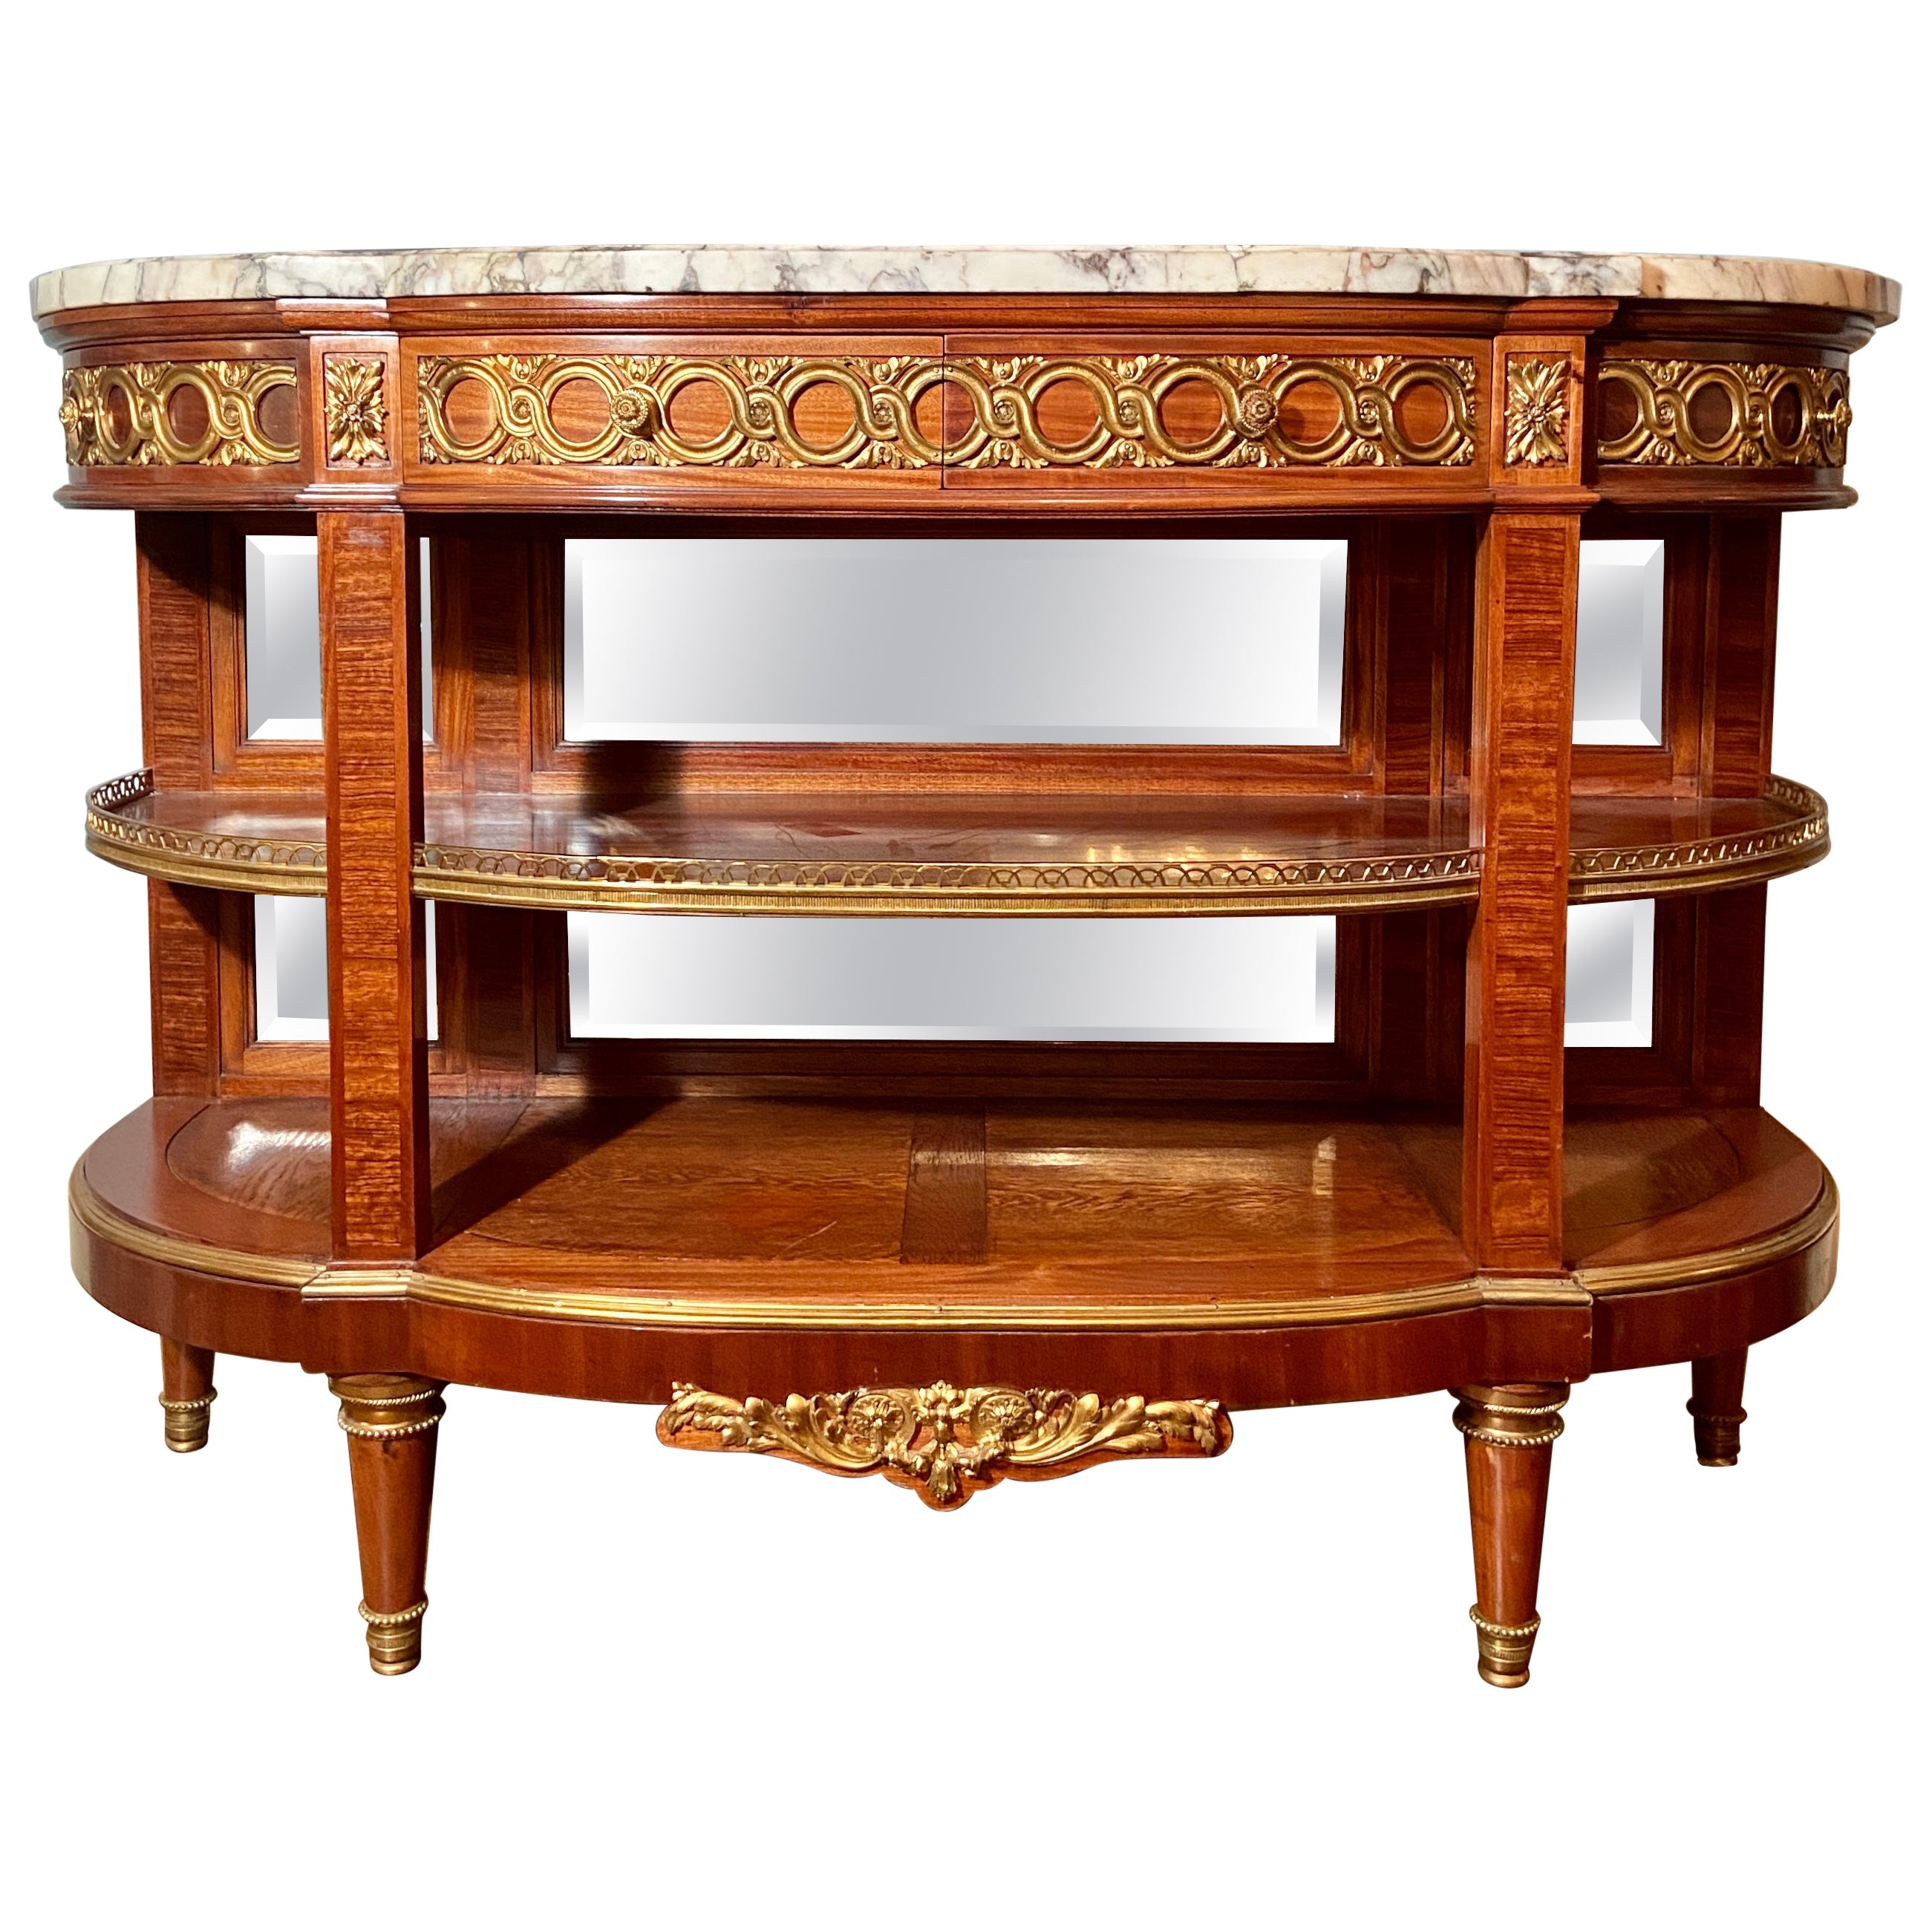 Antique French Mahogany and Bronze D'ore Marble Top Server, Circa 1880 For Sale